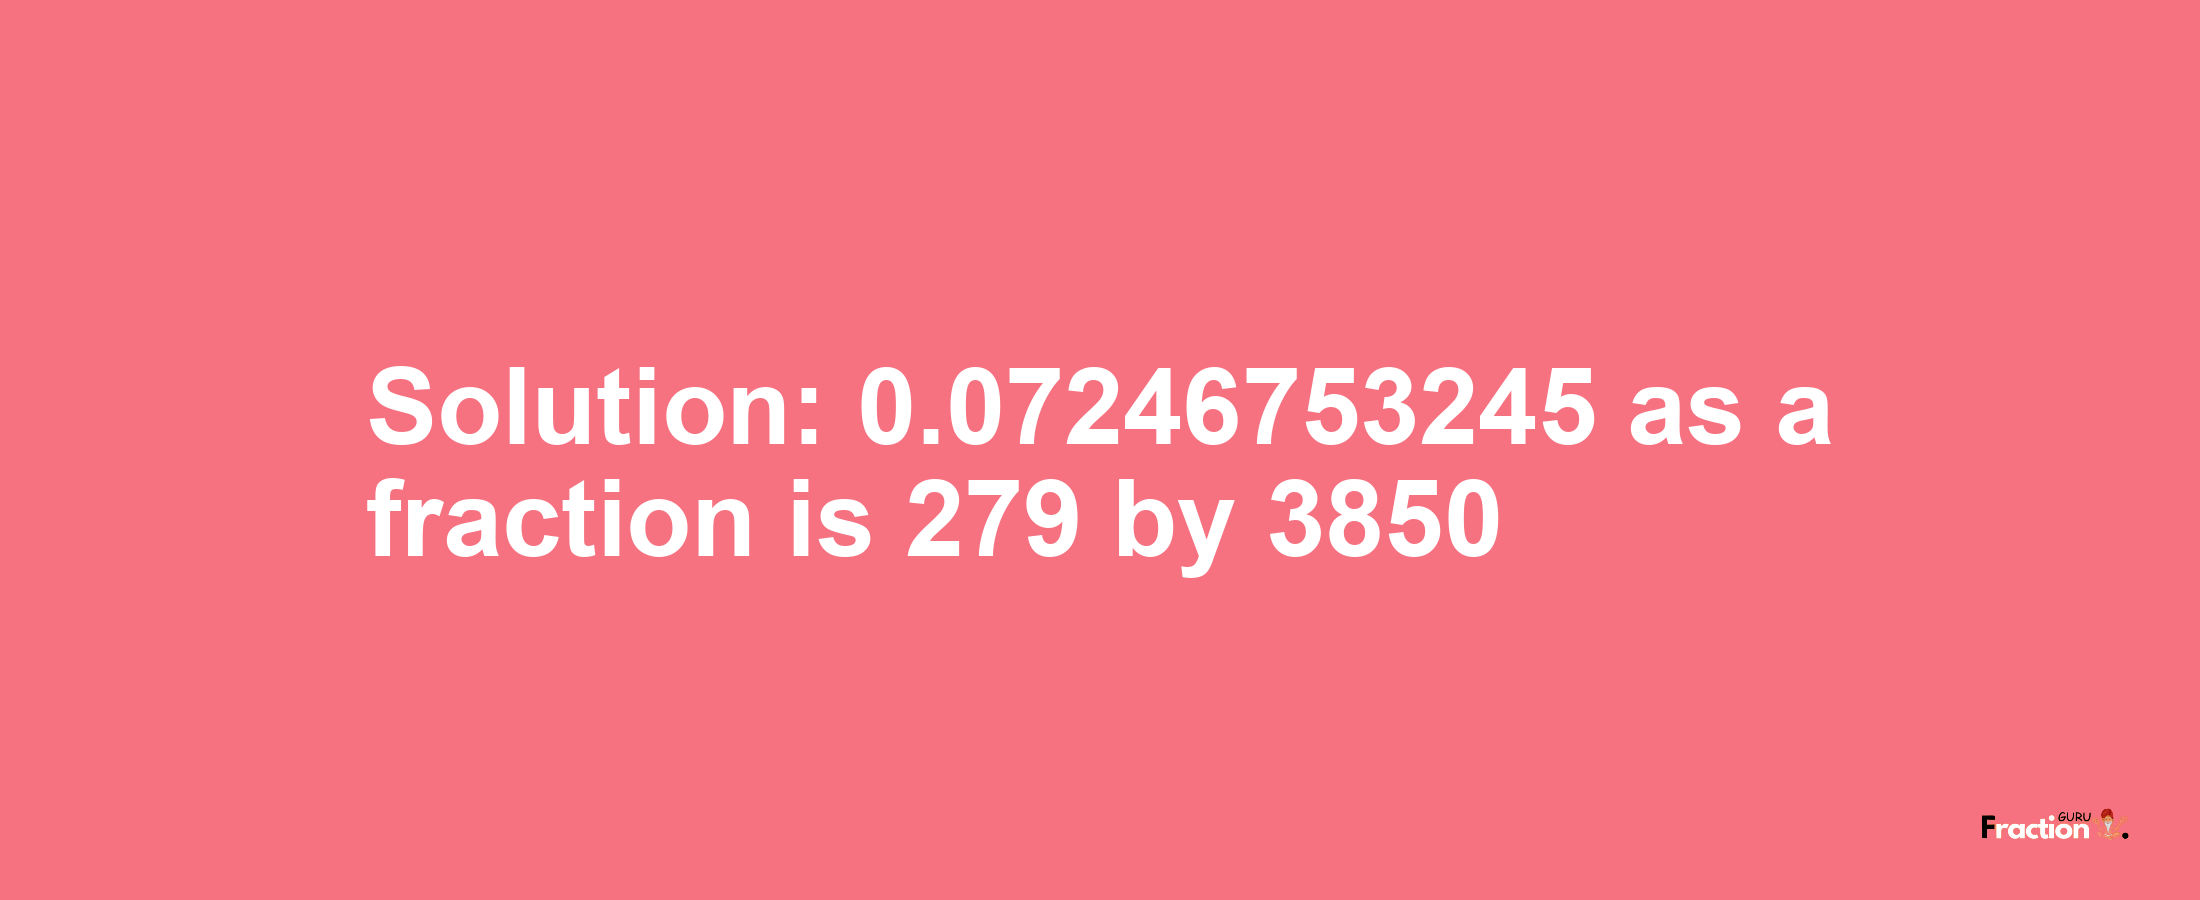 Solution:0.07246753245 as a fraction is 279/3850